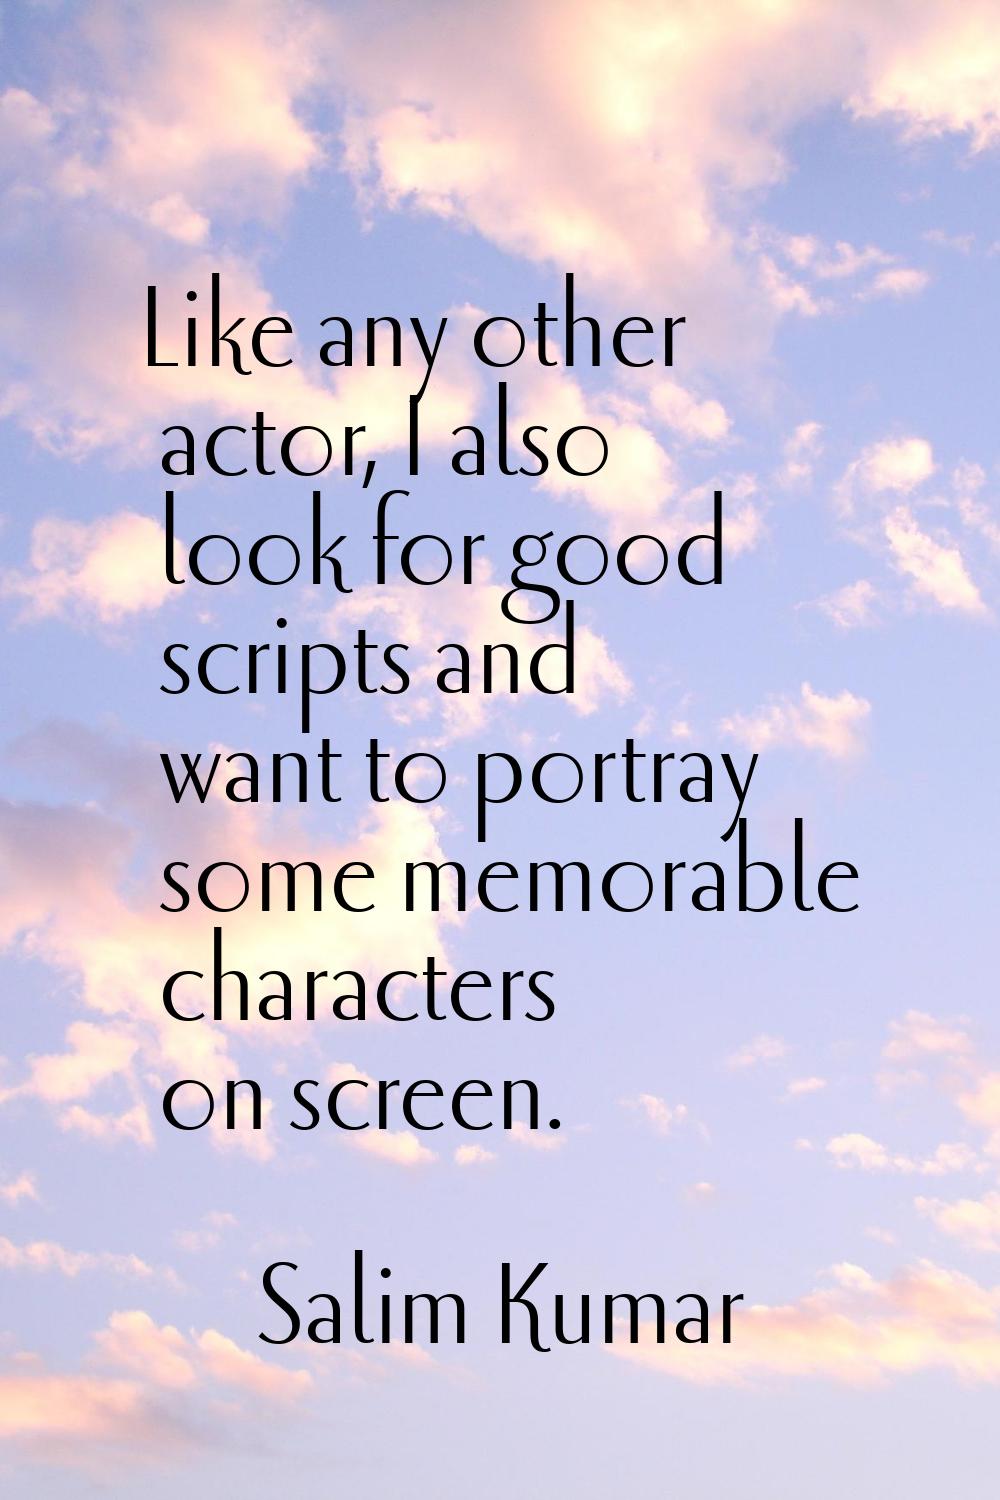 Like any other actor, I also look for good scripts and want to portray some memorable characters on